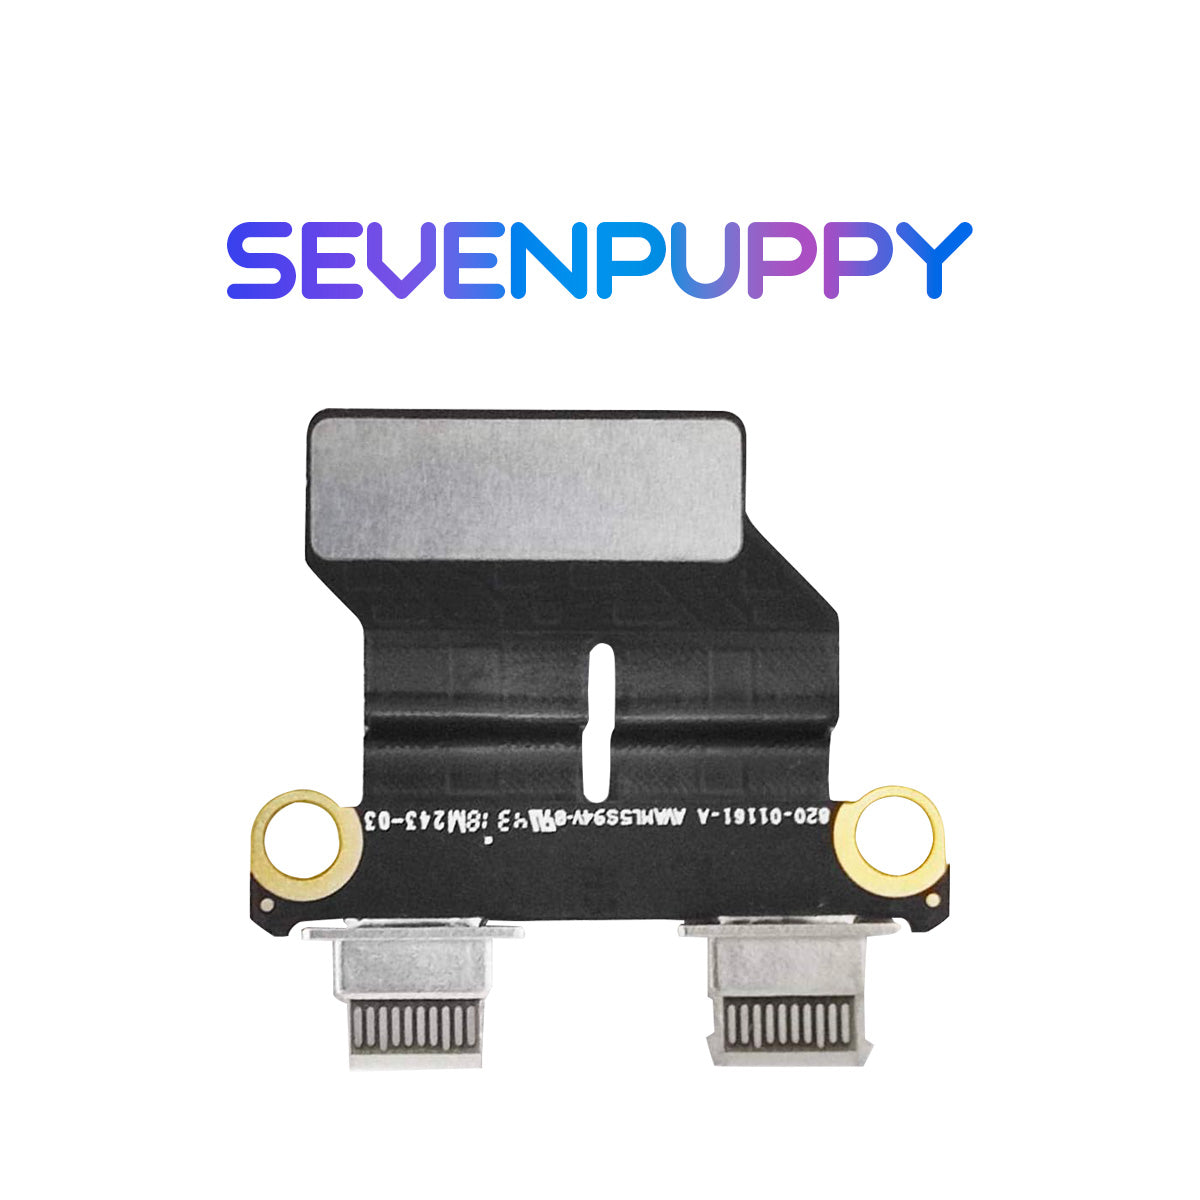 SEVEN PUPPY Brand NEW For Macbook Air 13" A2337 2020 Year Charging Port Power DC Jack I/O USB Audio Board